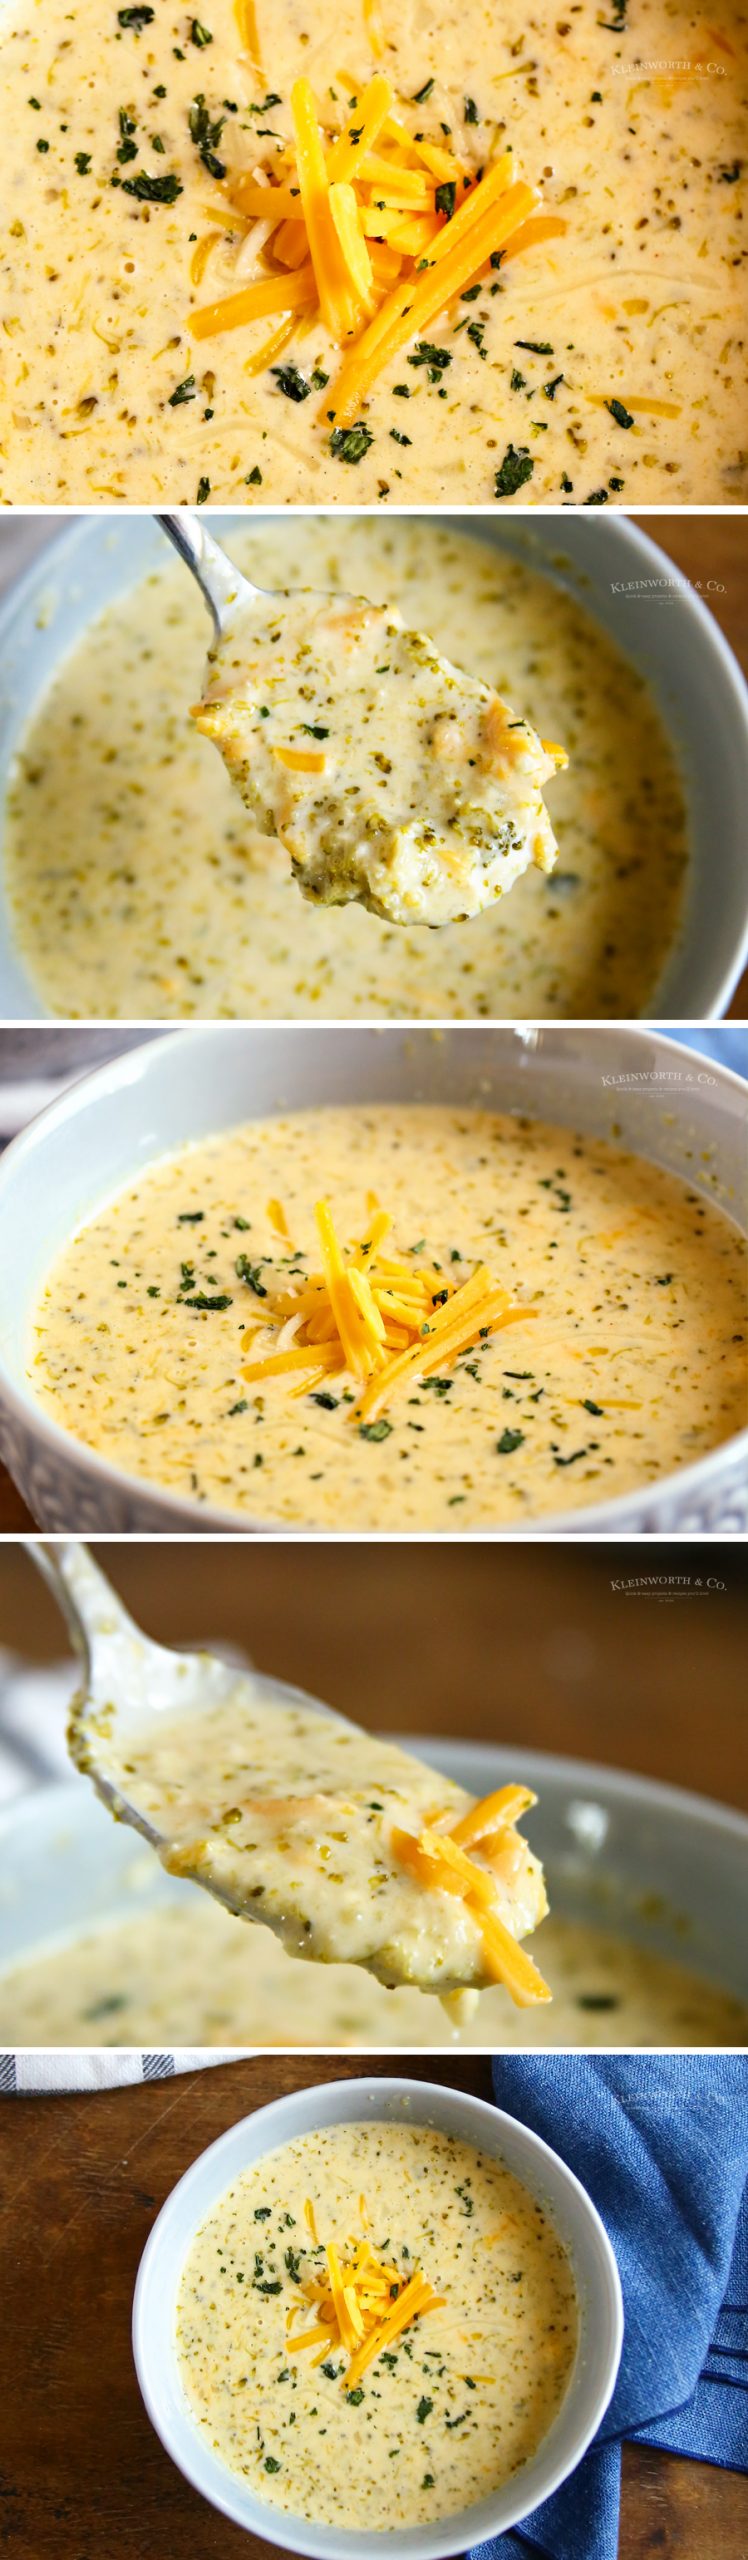 how to make Instant Pot Broccoli Cheddar Soup